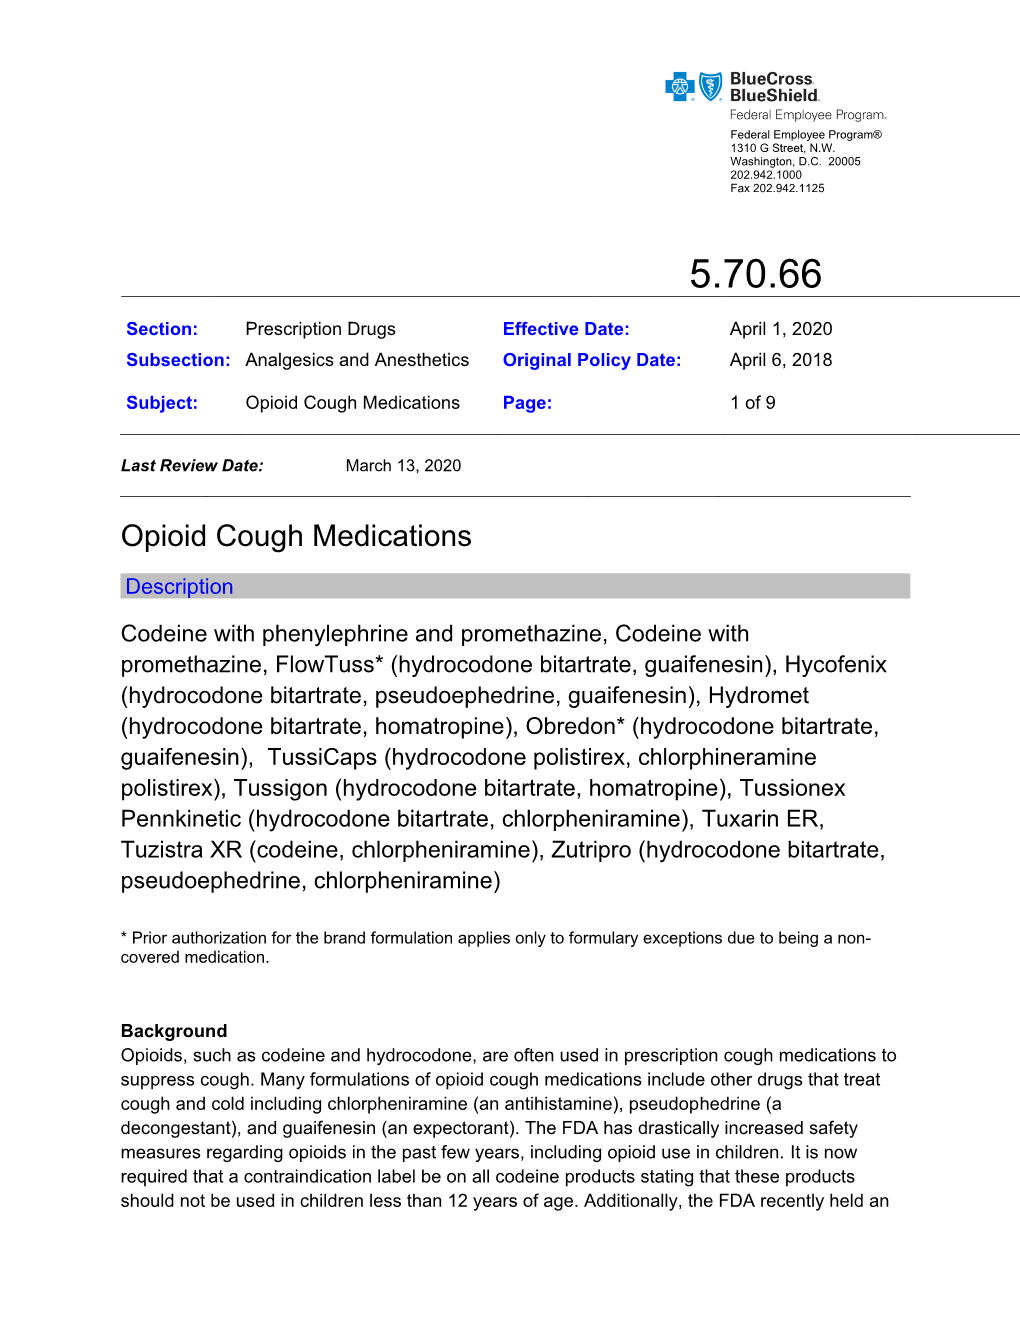 Opioid Cough Medications Page: 1 of 9